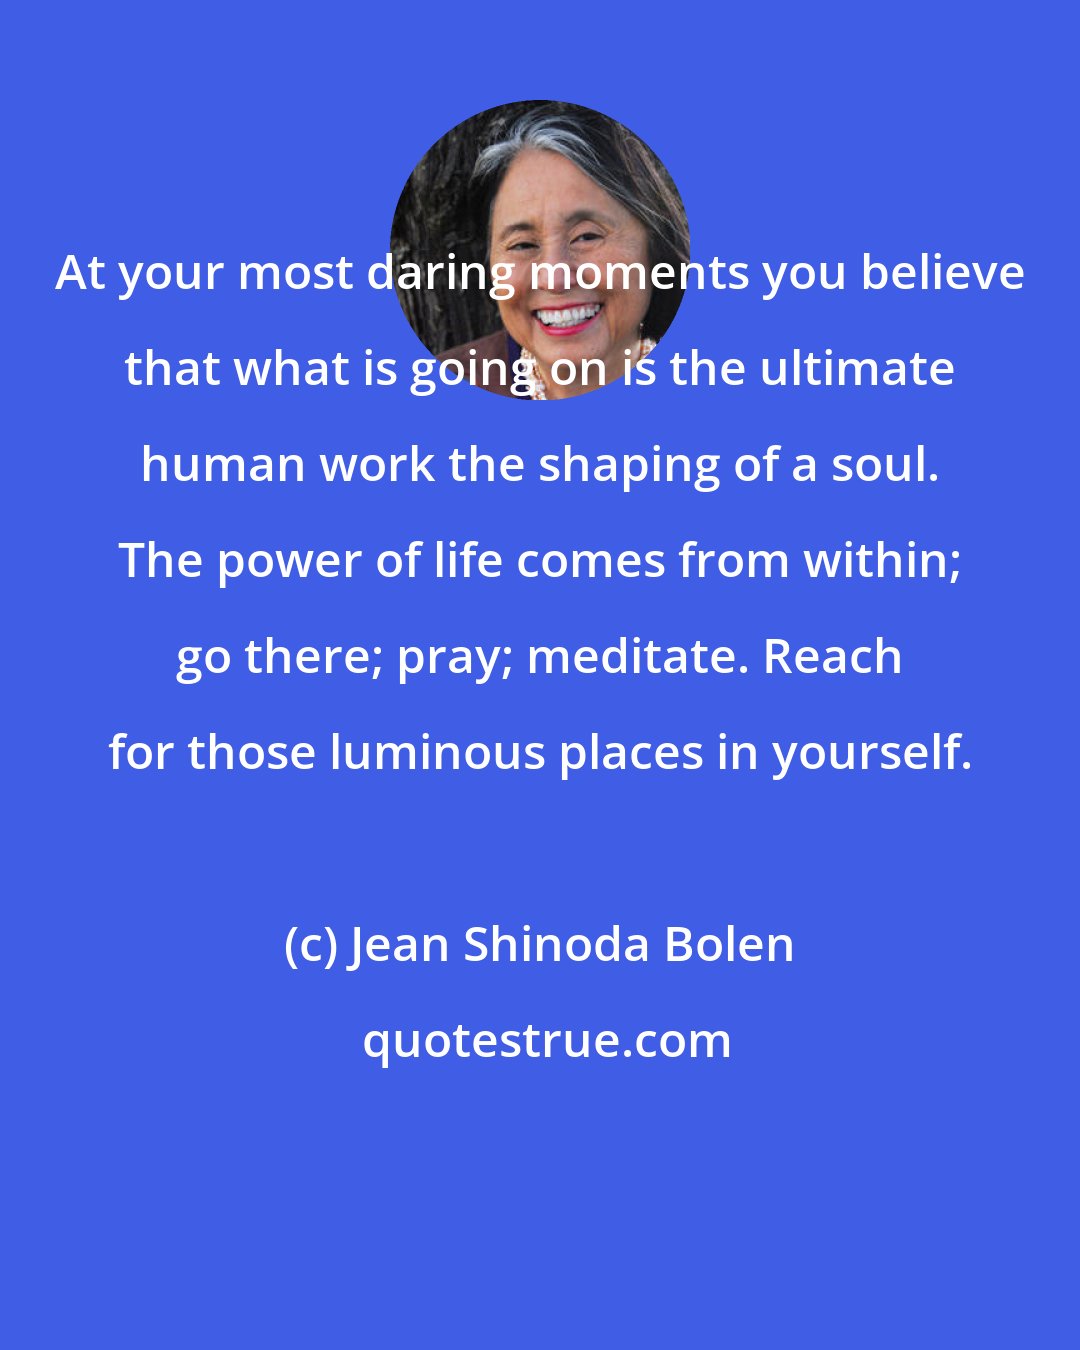 Jean Shinoda Bolen: At your most daring moments you believe that what is going on is the ultimate human work the shaping of a soul. The power of life comes from within; go there; pray; meditate. Reach for those luminous places in yourself.